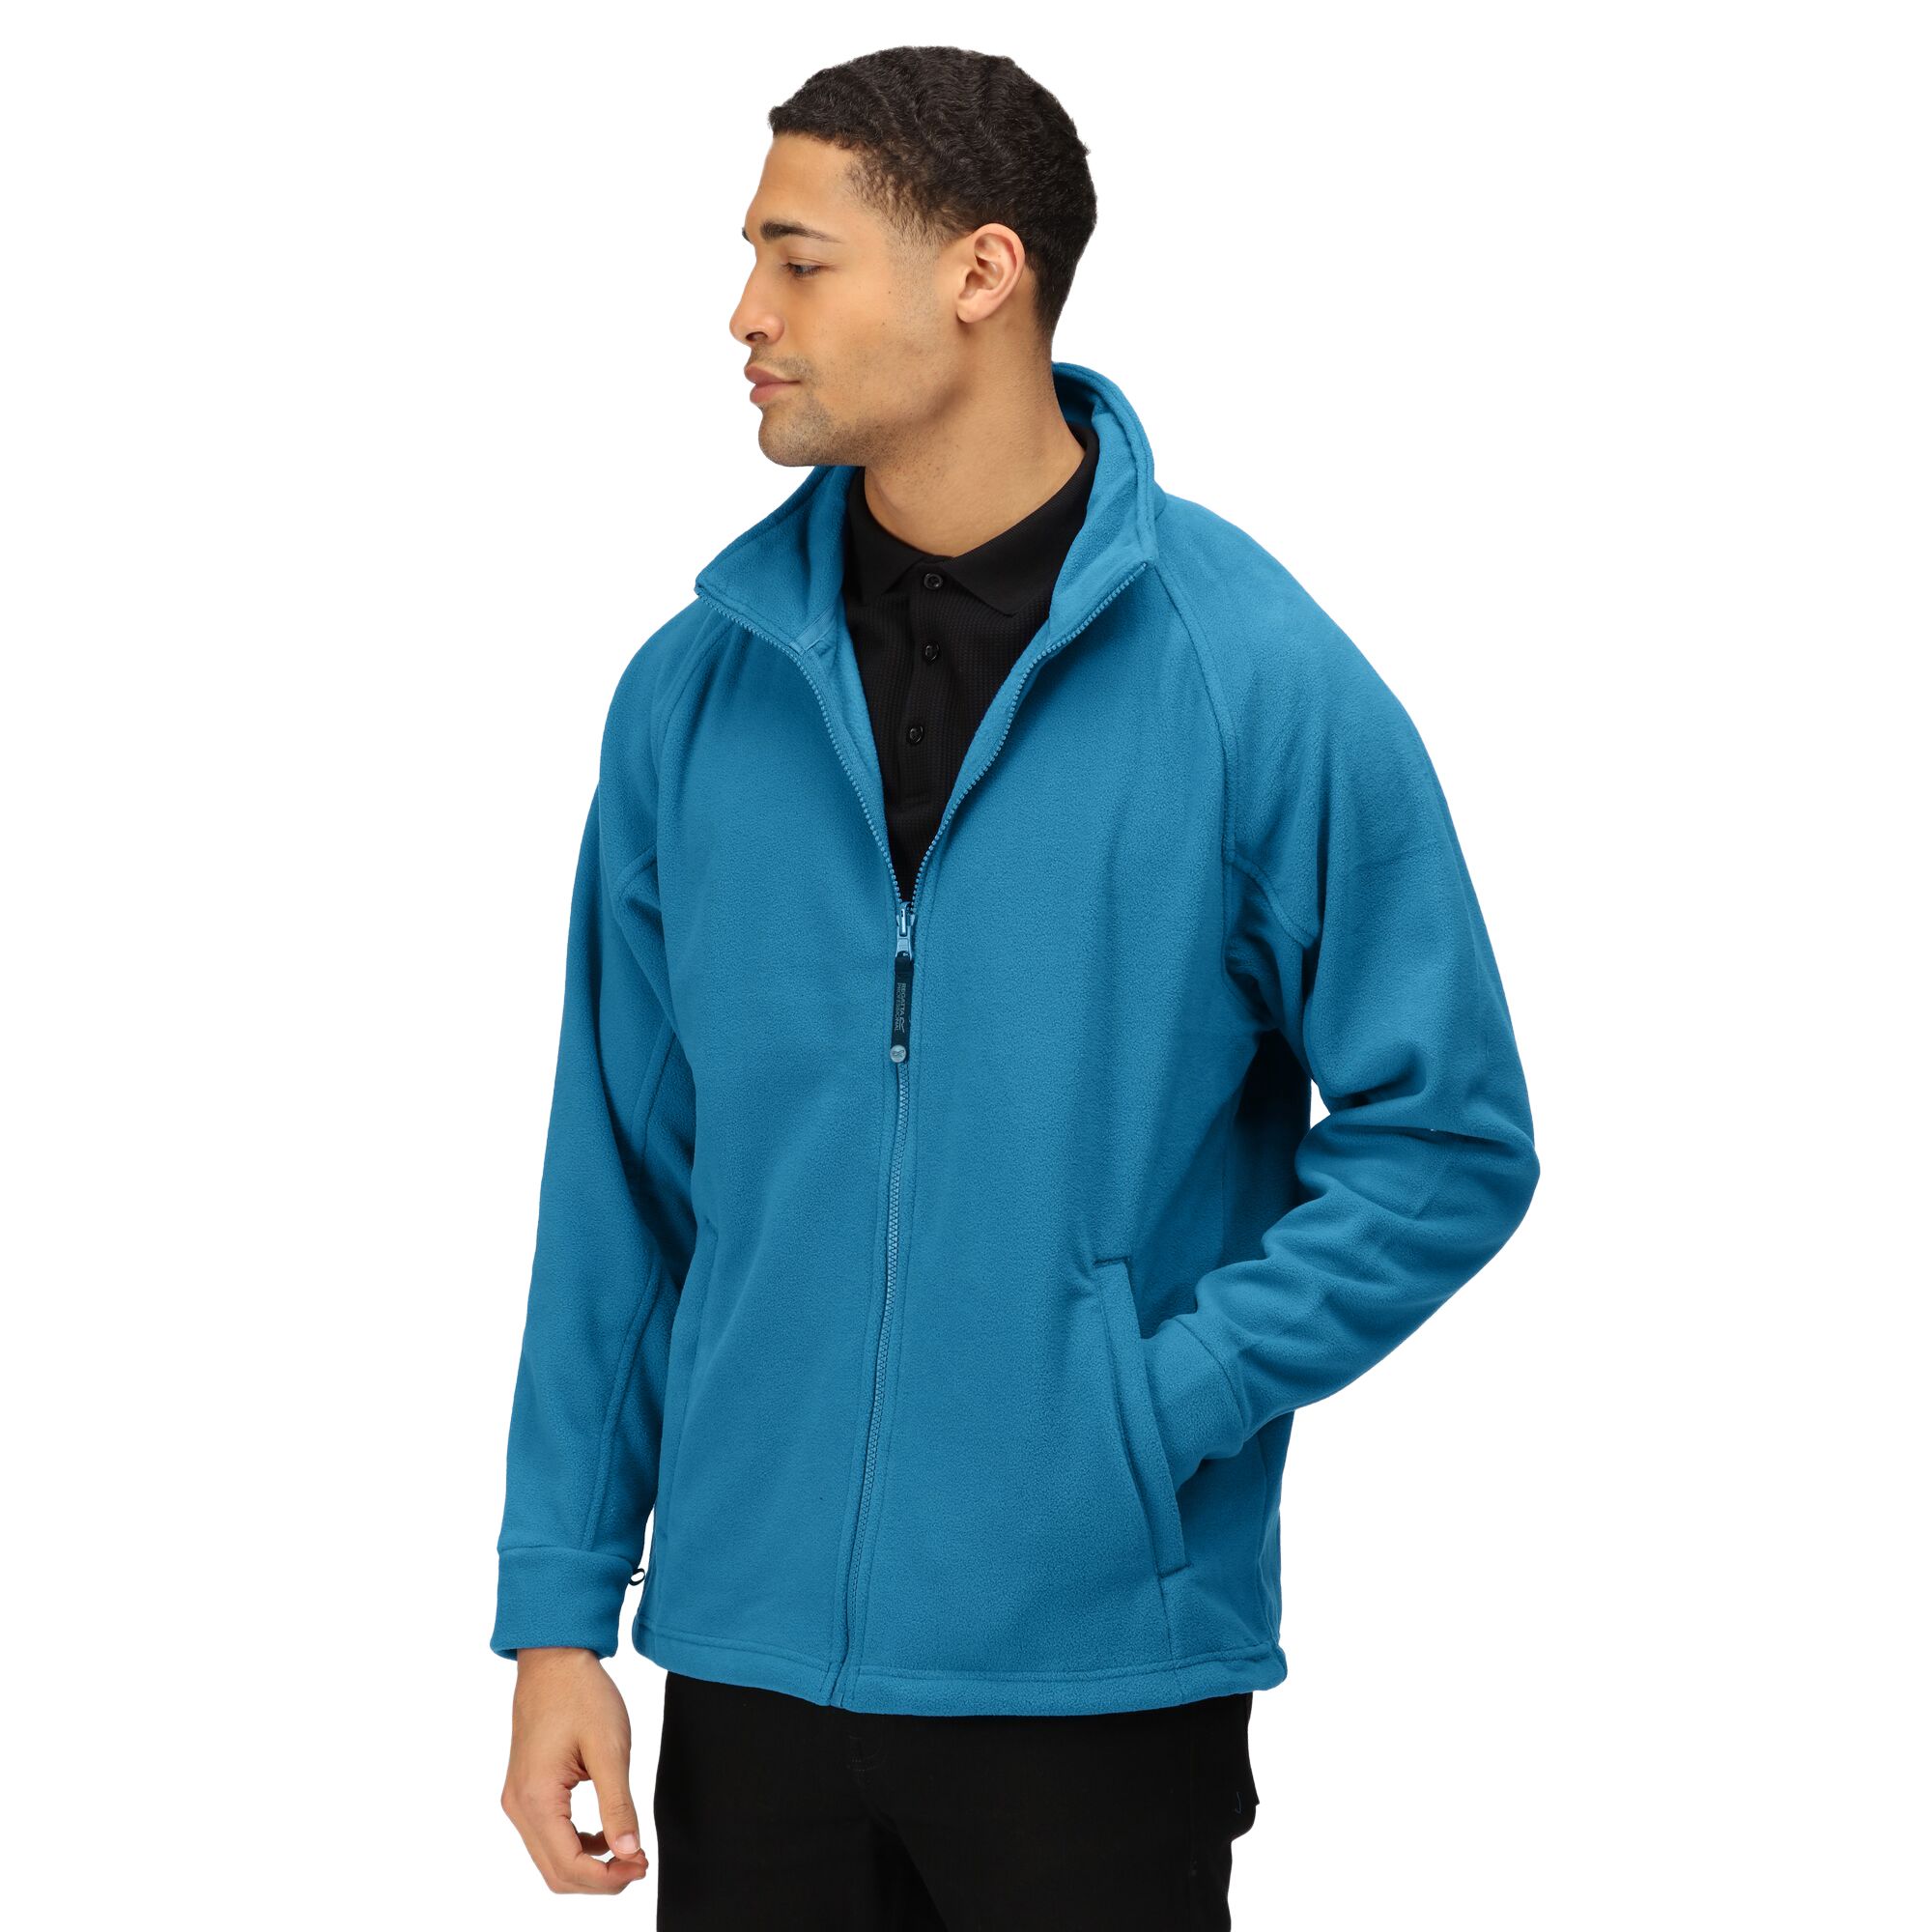 280 Series anti-pill Symmetry fleece with fleece cuffs. 2 zipped lower pockets and adjustable shockcord hem. Interactive. Also available in Kids. Size Chest (to fit) XS - 36” S - 38” M - 40” L - 42 XL - 44” 2XL - 47” 3XL - 50” 4XL - 52”. Fabric 280 Series anti-pill Symmetry Fleece. Weight 280 gsm